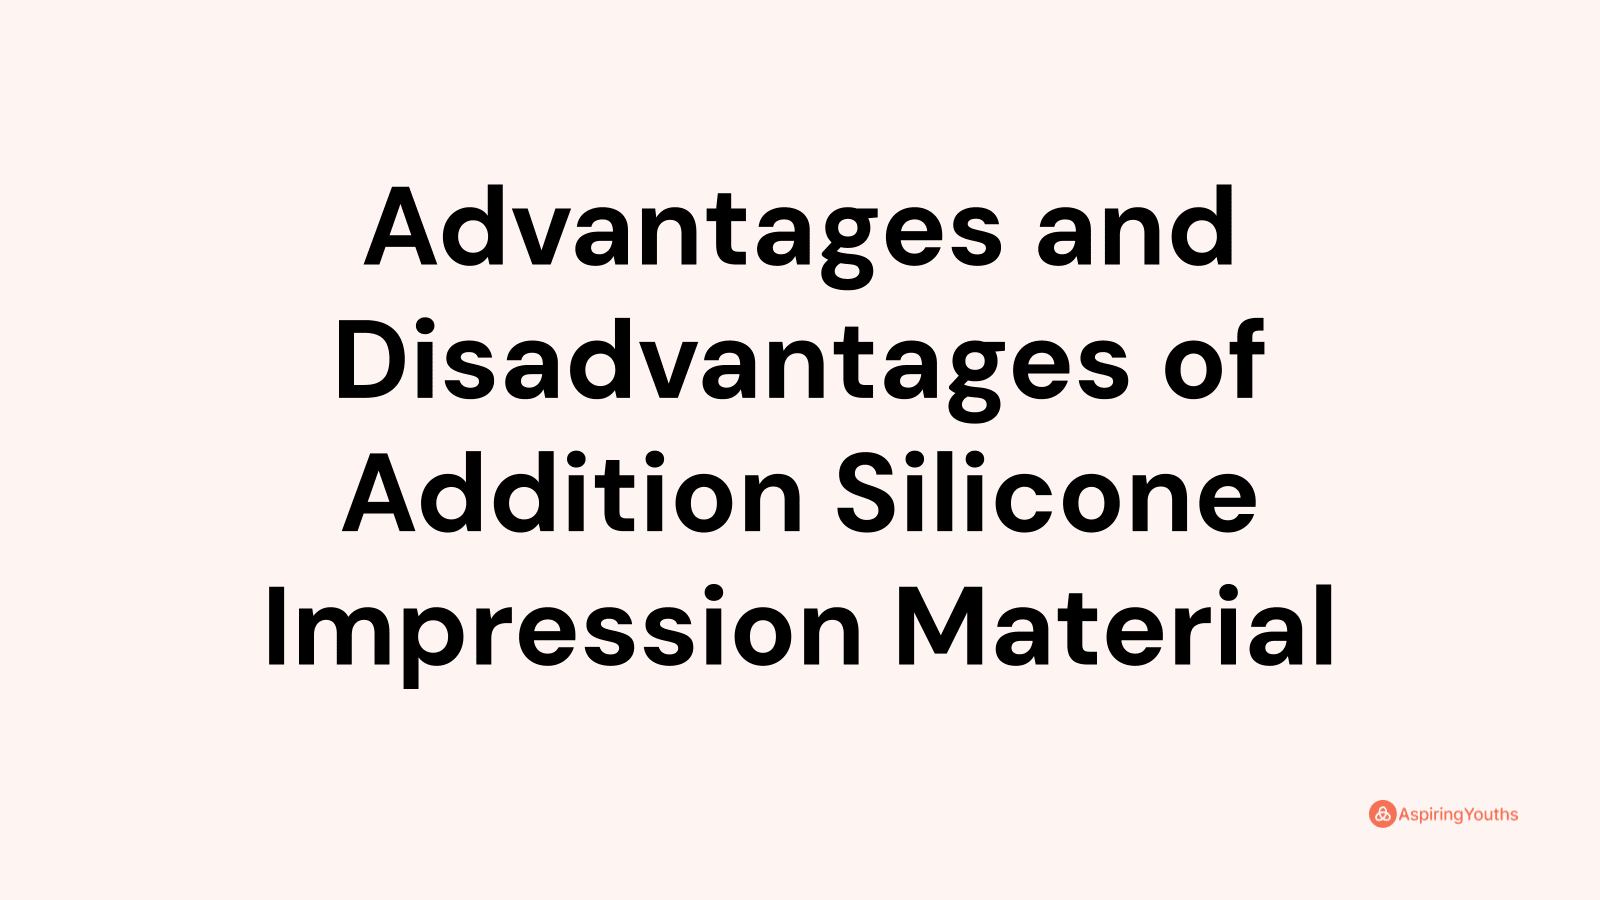 Advantages and disadvantages of Addition Silicone Impression Material